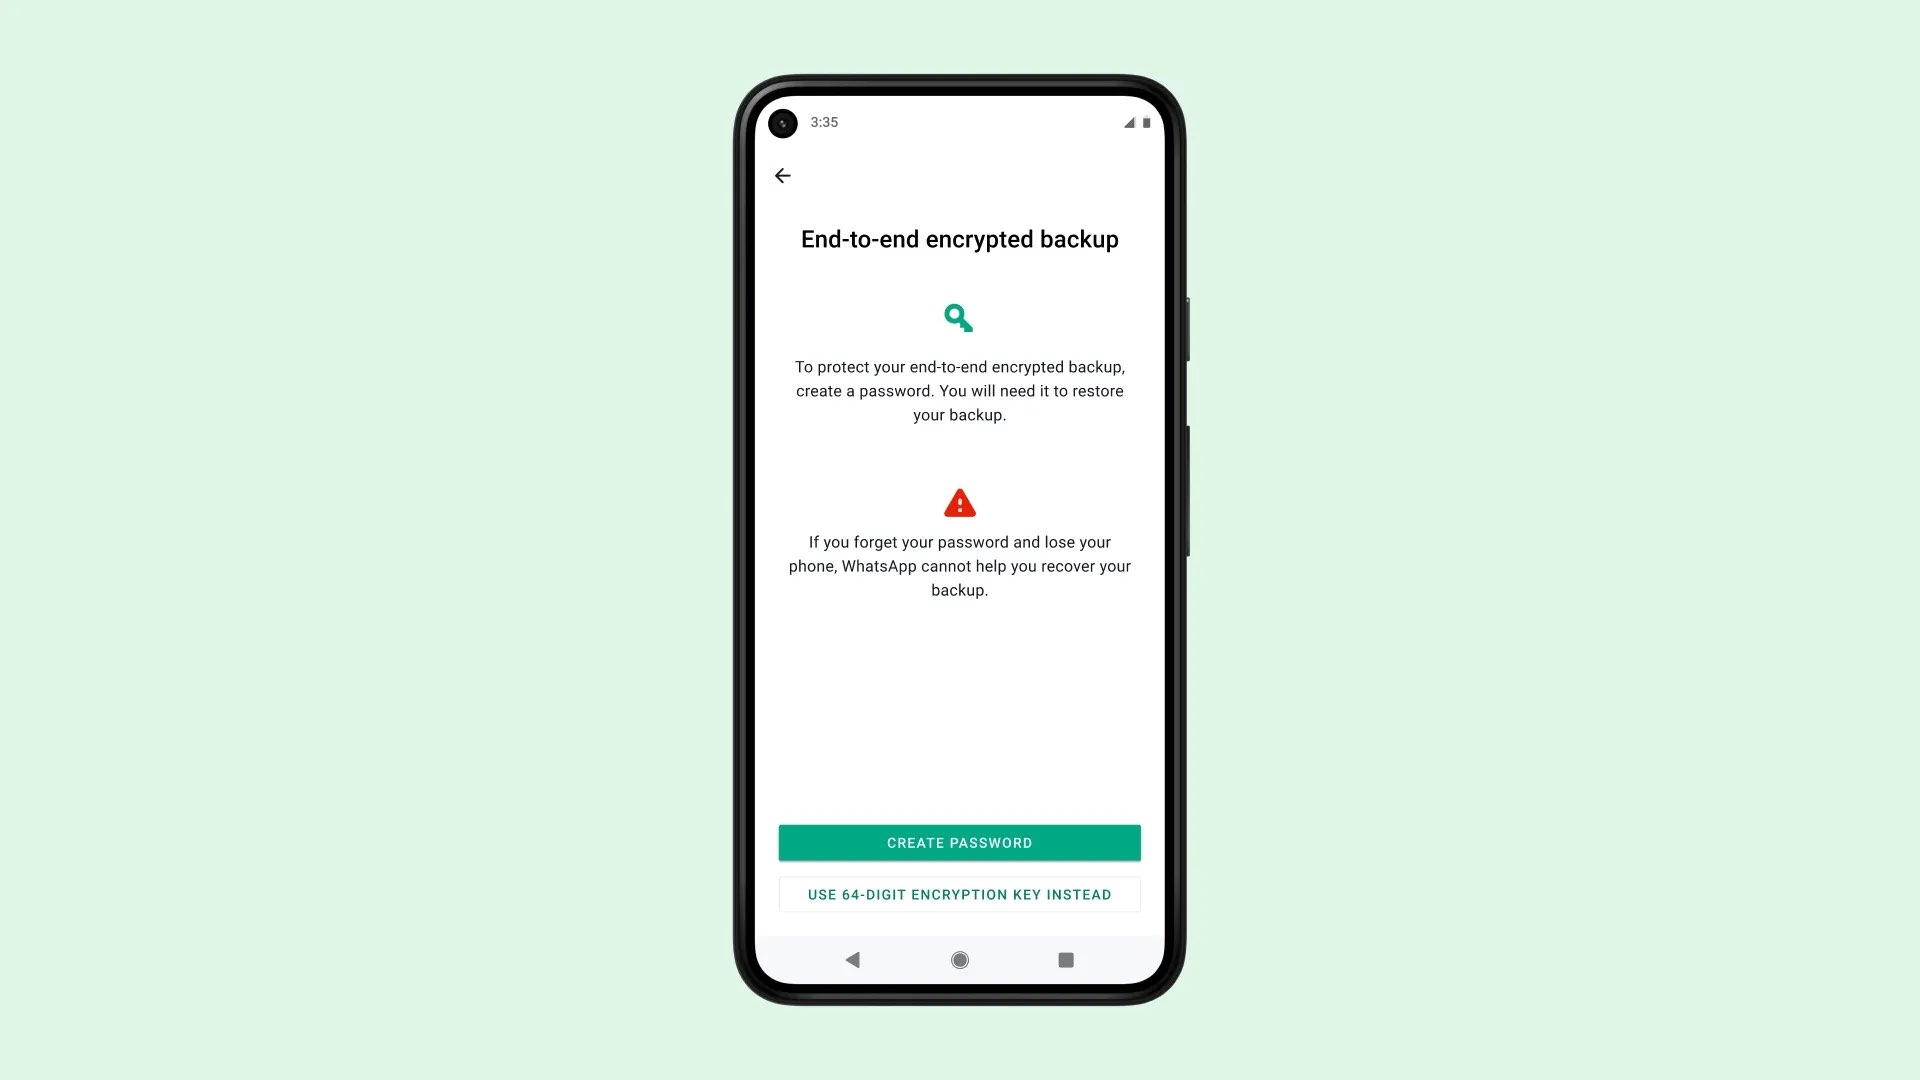 Meta's promotional image showing Android device screenshot set against a solid light-green background, with the device displaying a splash screen in WhatsApp for end-to-en encrypted backups